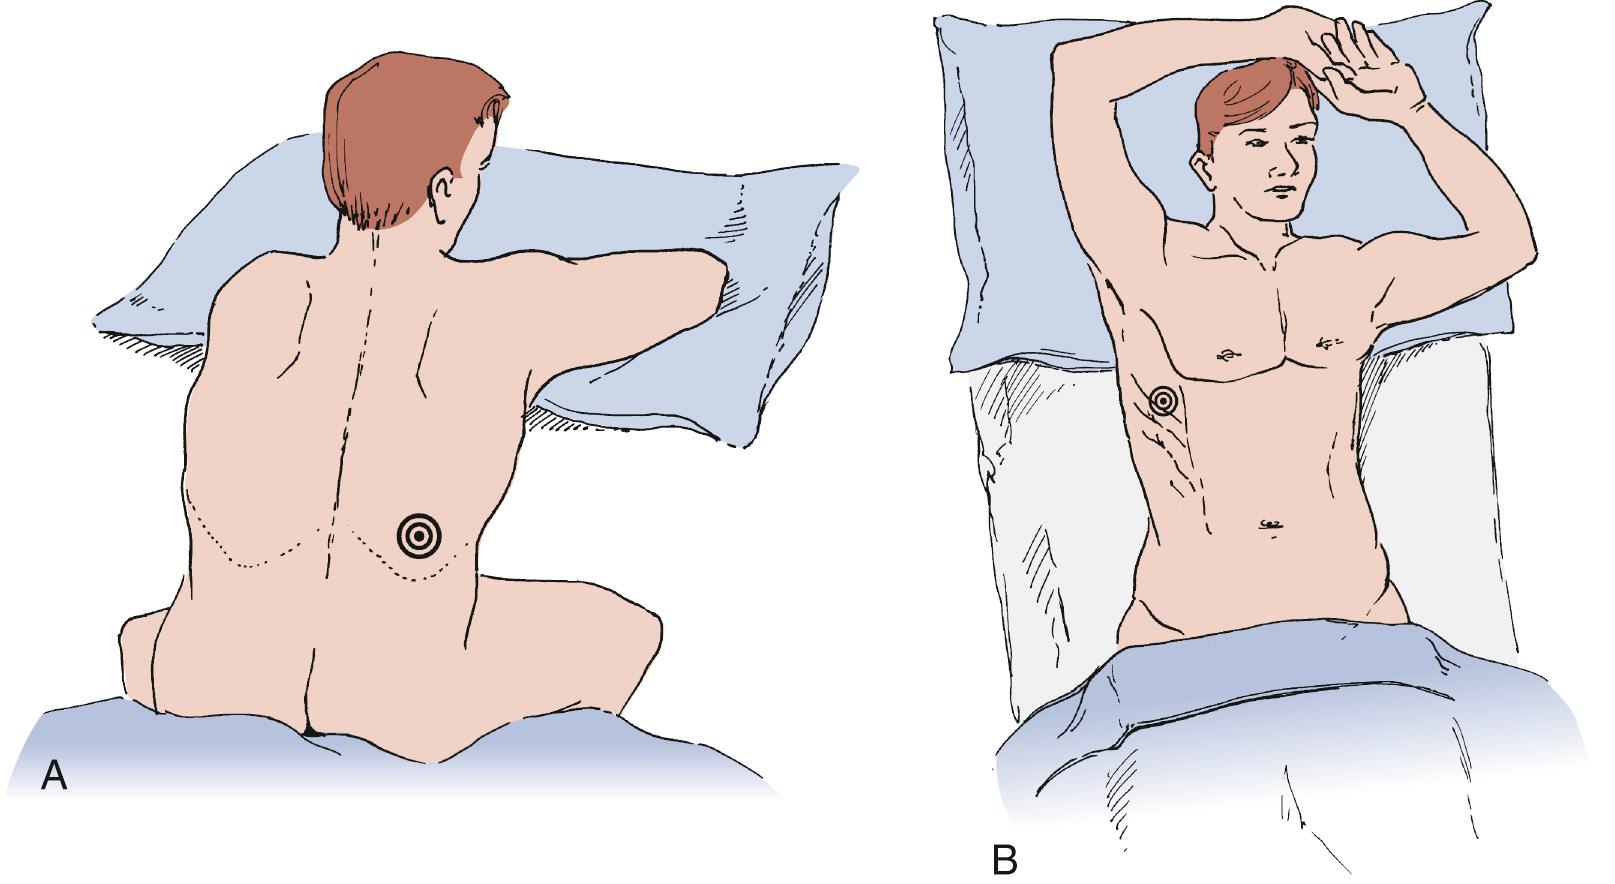 FIGURE 30-4, A, Common patient position for insertion of a thoracentesis needle or catheter. Posterior approach allows access to the most dependent (posterior pleural) sulcus to allow maximal drainage of nonloculated fluid. B, Lateral patient positioning for thoracentesis or chest tube placement is also useful for effusions with large lateral collections of fluid. The patient's arm is abducted and flexed over his head to facilitate access to the lateral chest.